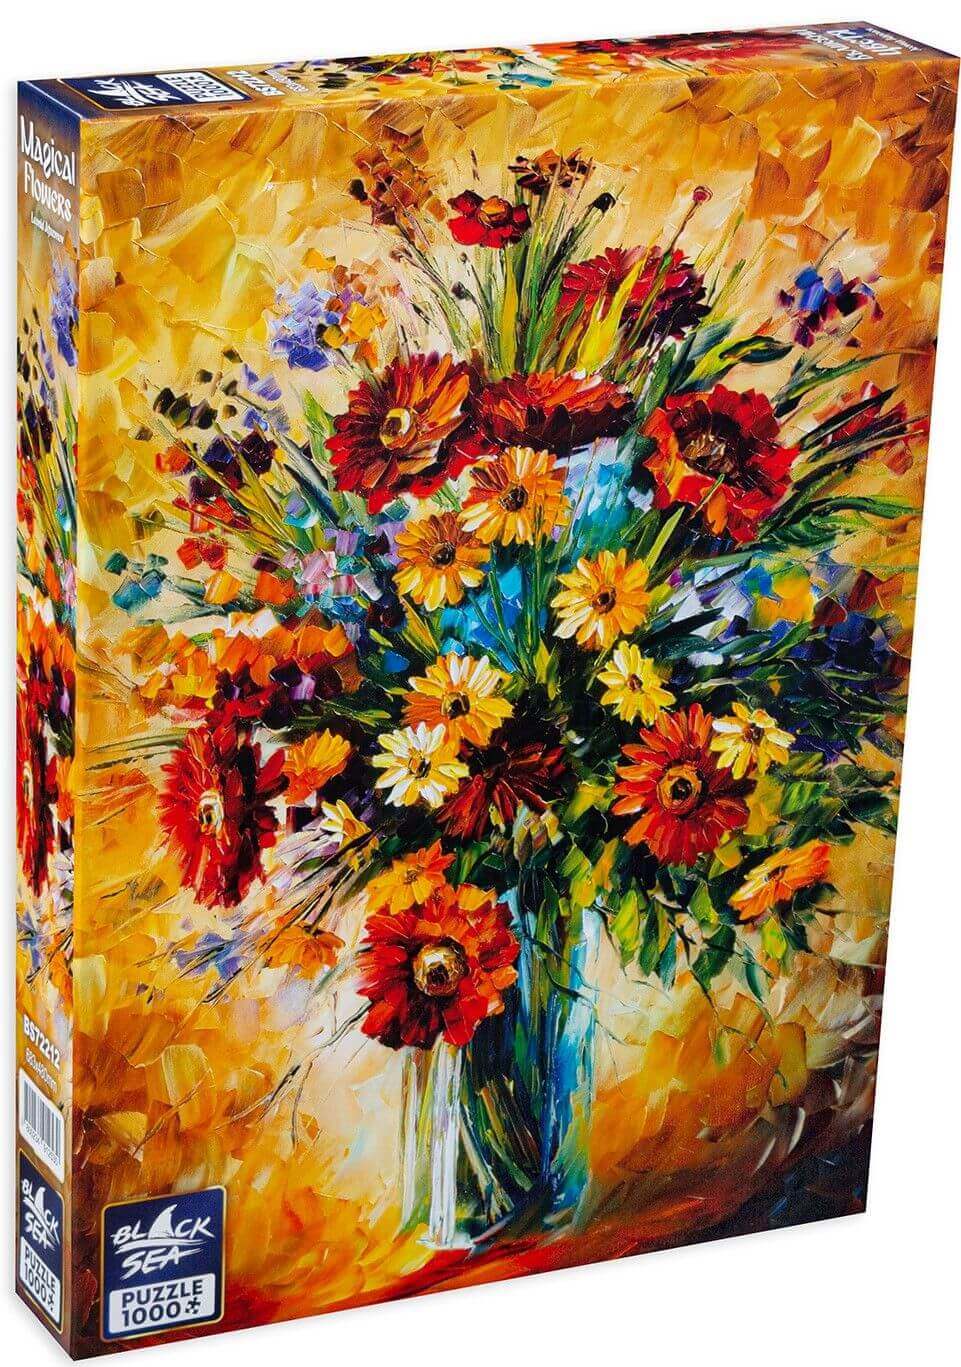 Puzzle Black Sea Premium 1000 pieces - Magical Flowers, The artist's brush has captured the scent of summer, gathered in a bouquet and sealed in a painting. Every colored stroke, thin line and light and shadow are in perfect harmony. A moment of perfectio